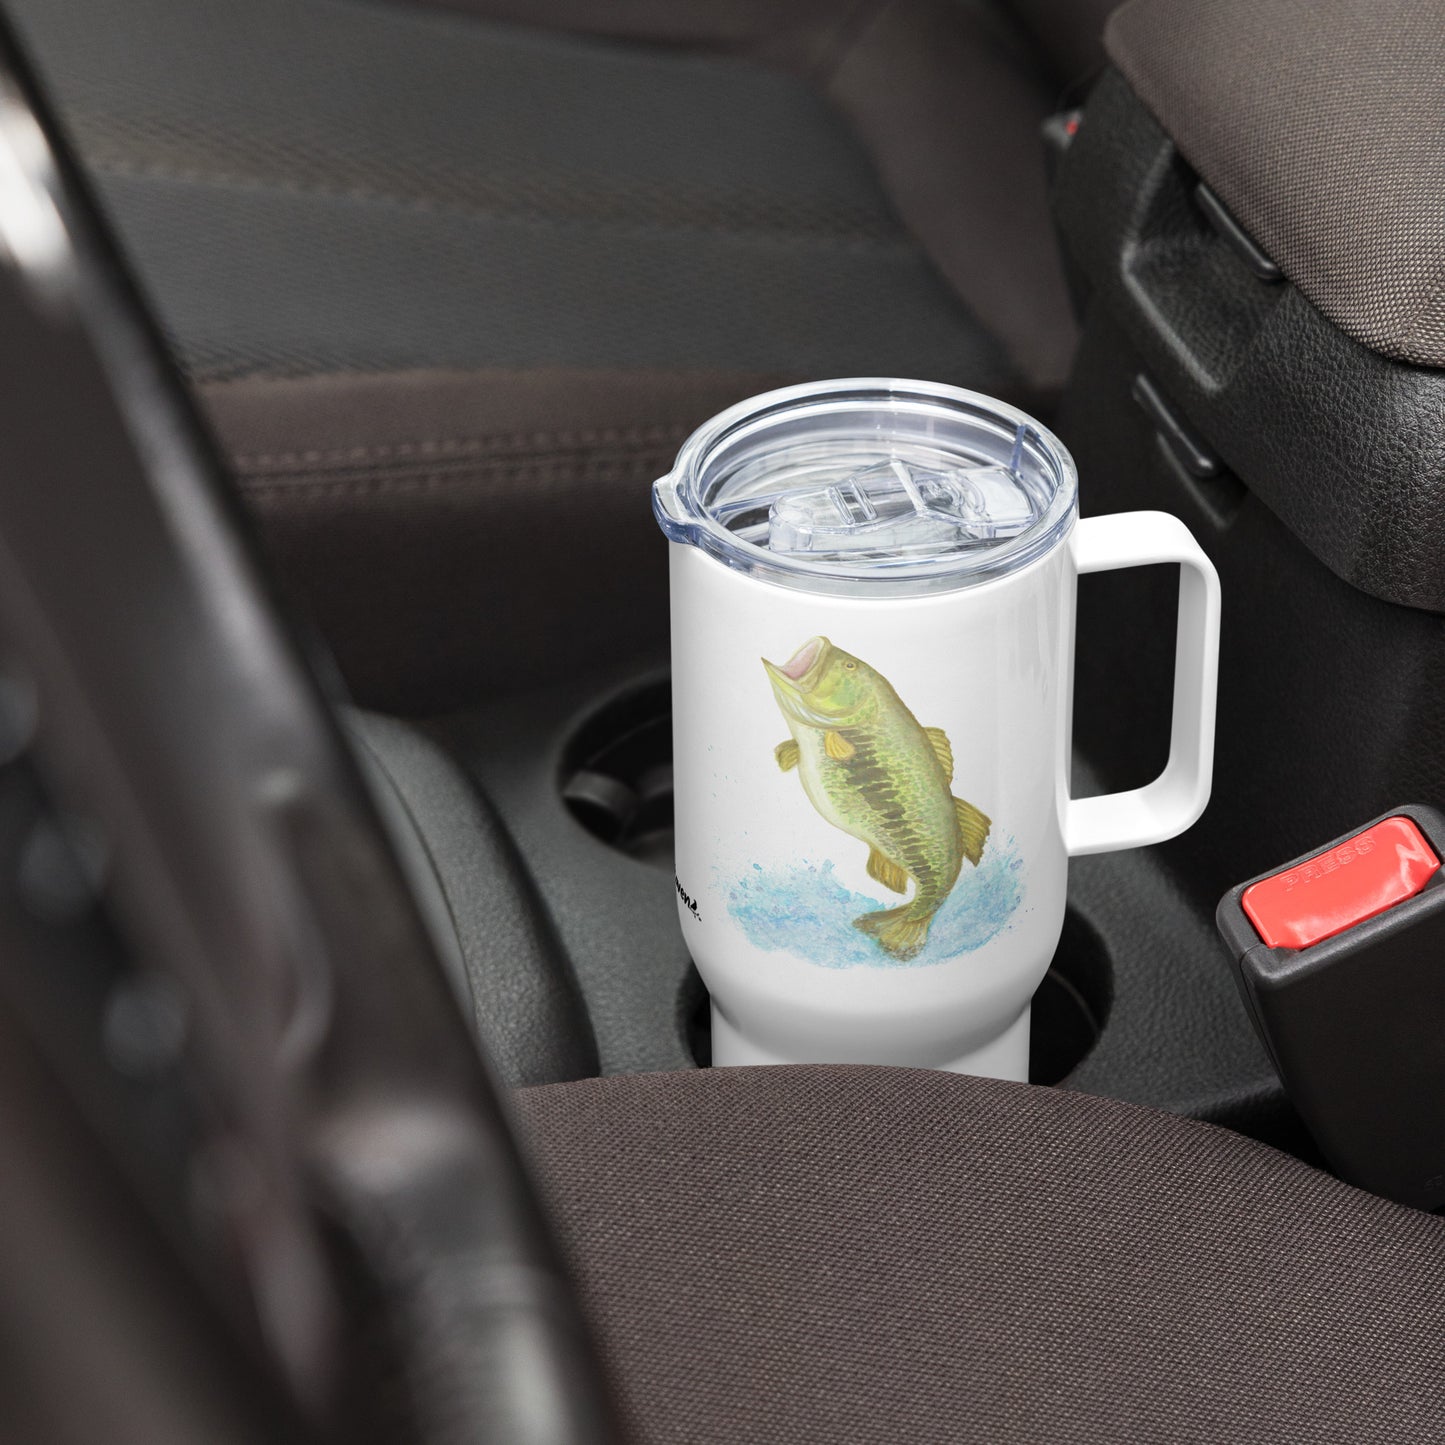 Stainless steel travel mug with handle. Holds 25 ounces of hot or cold drinks. Has print of watercolor bass fish on both sides. Fits most car cup holders. Comes with spill-proof BPA-free plastic lid. Shown in car cup holder.